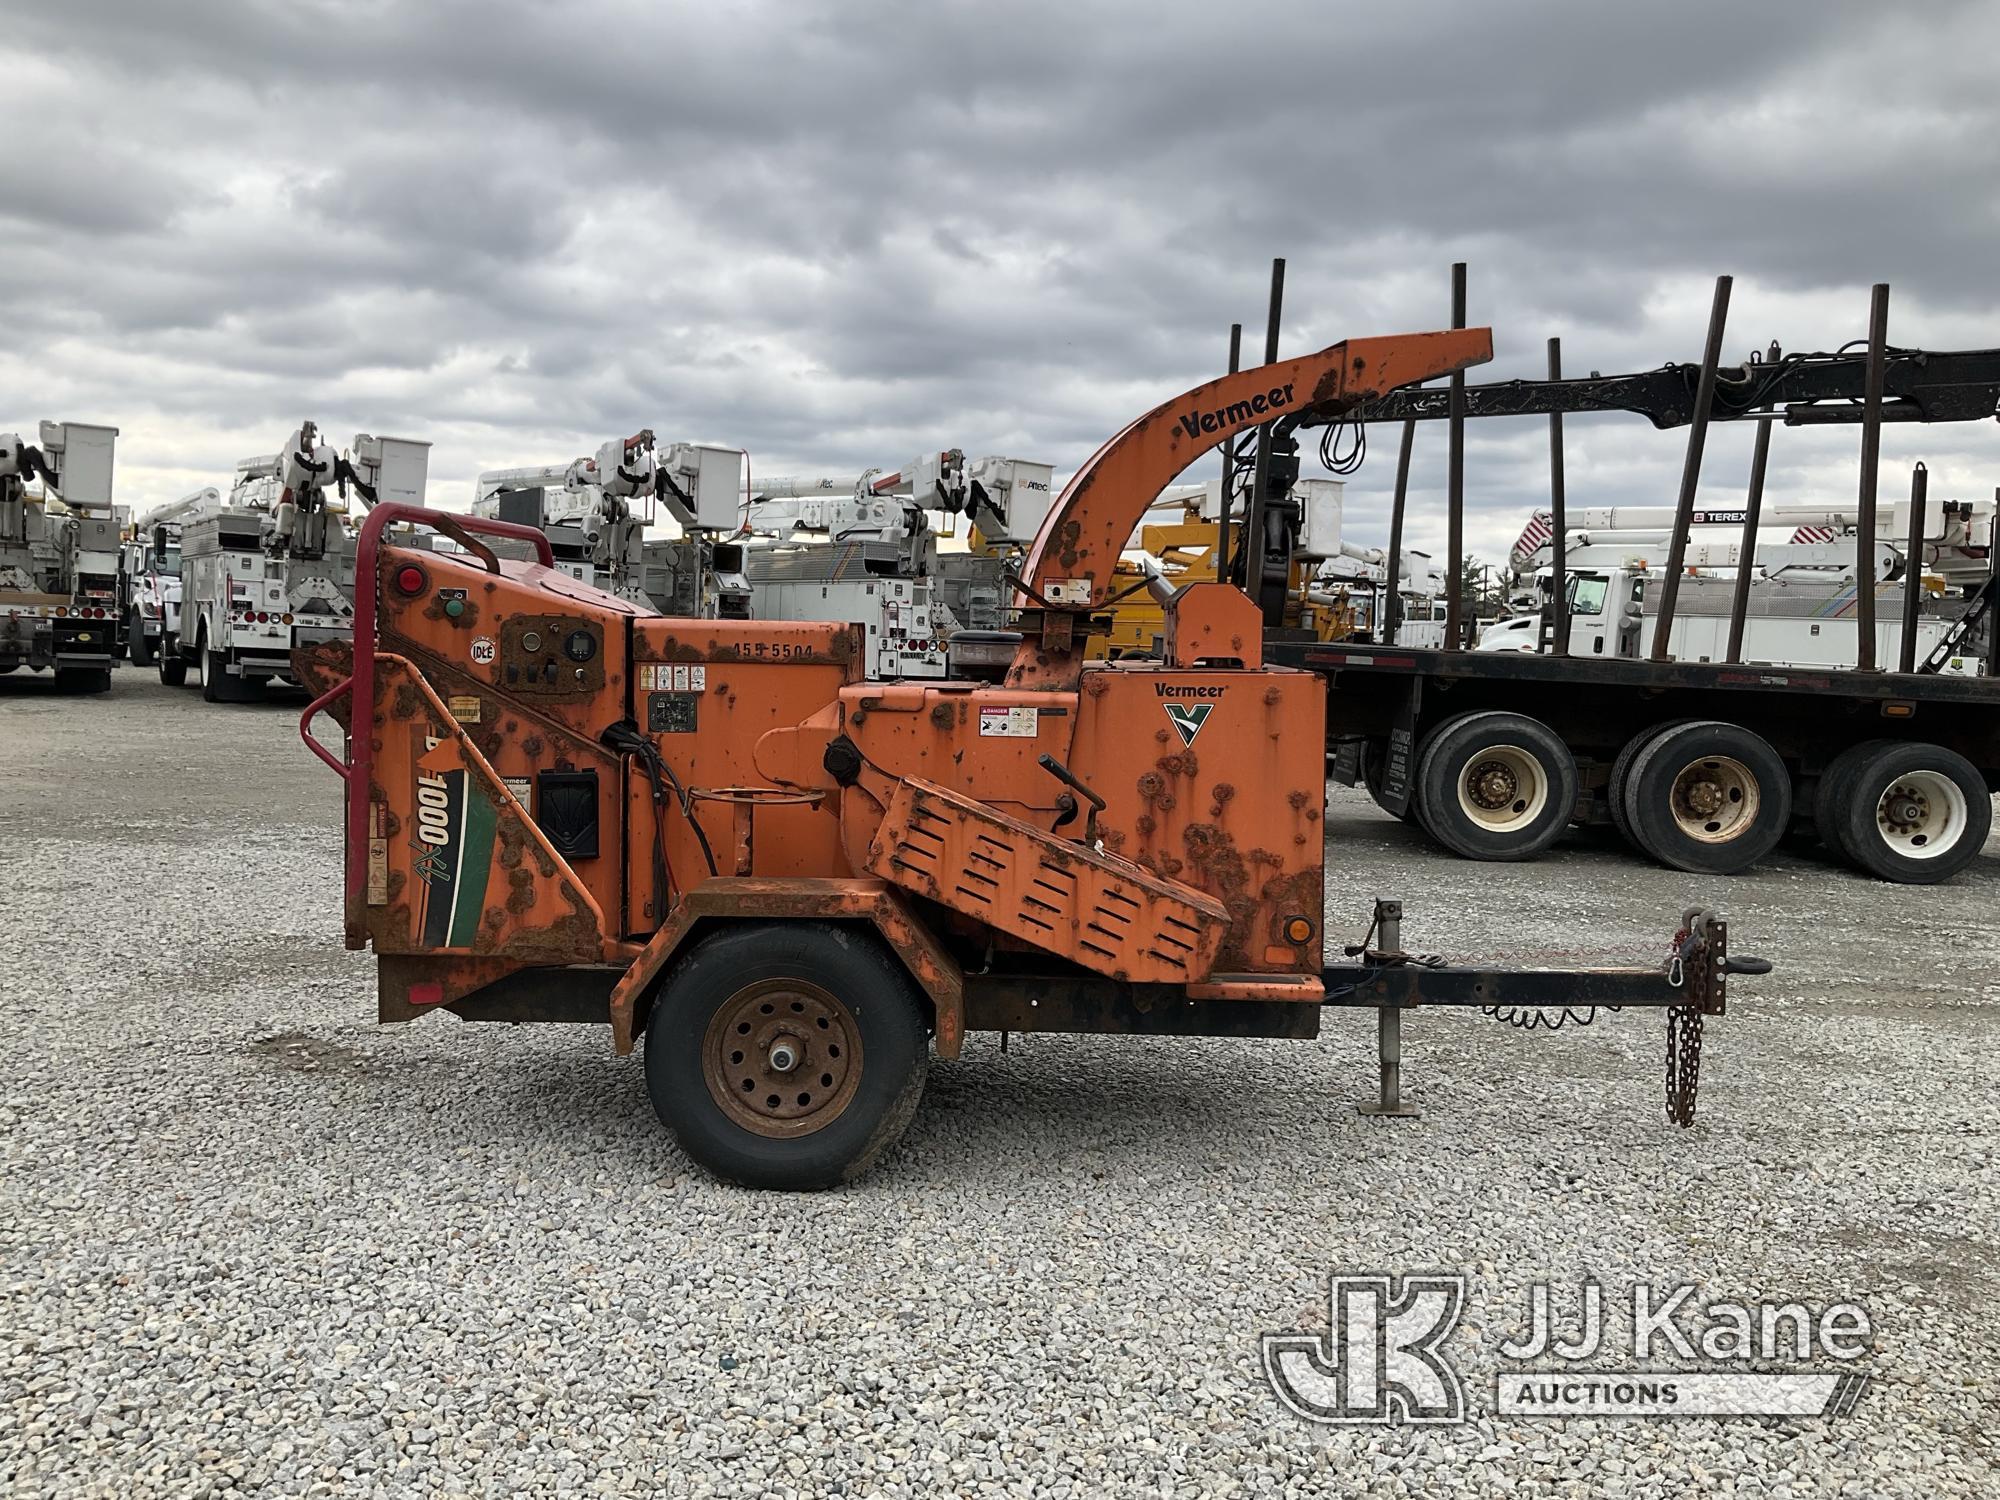 (Shrewsbury, MA) 2015 Vermeer BC1000XL Chipper (12in Drum) Runs) (Operating Condition Unknown, Rust